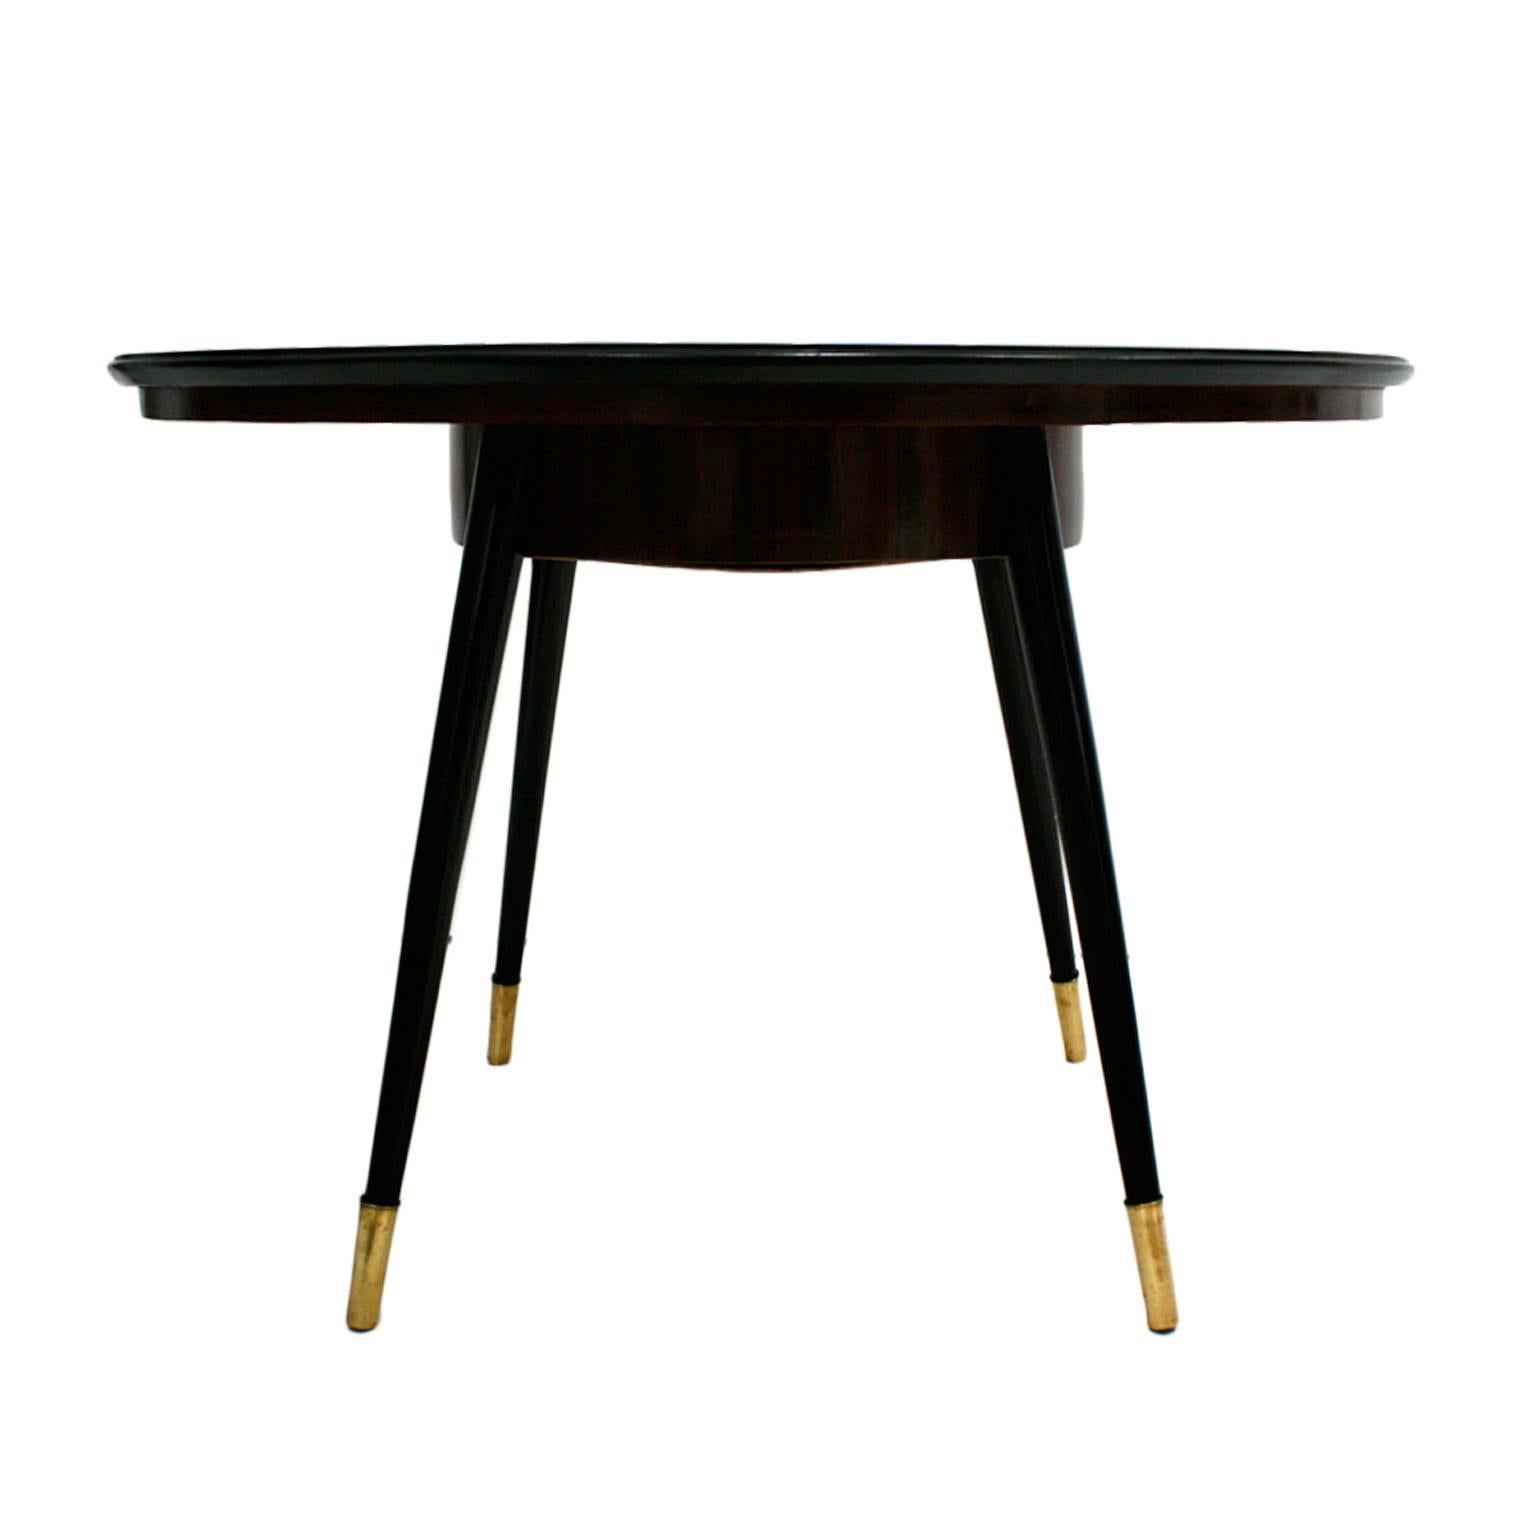 Circular pedestal table composed of rosewood marquetry top and conical legs with brass details.
 
 